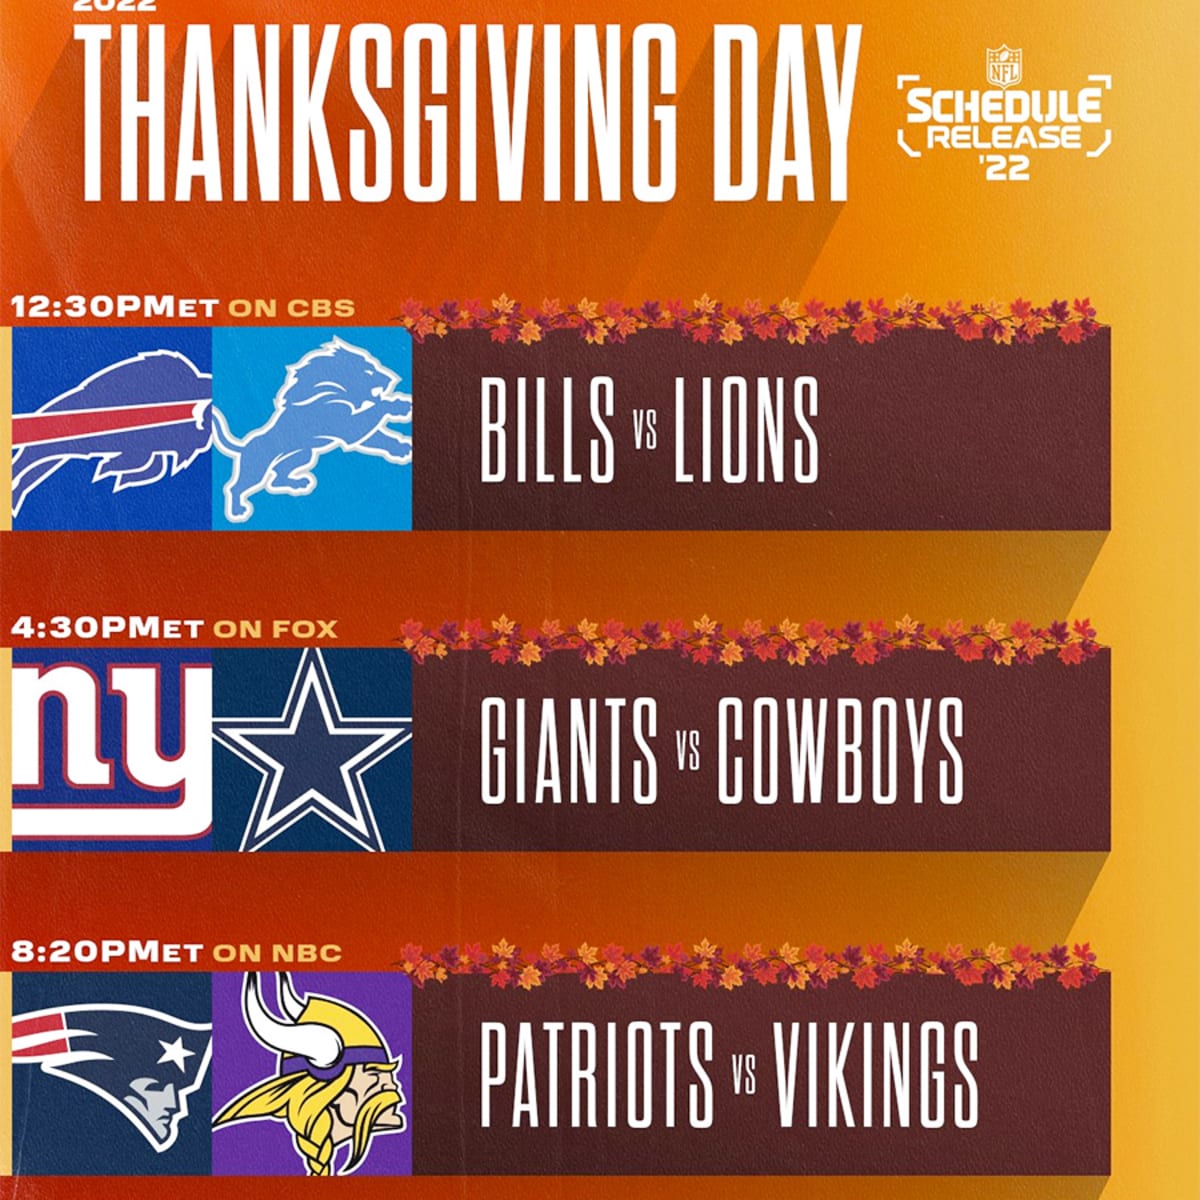 Thanksgiving Day NFL schedule 2022: Which teams are playing